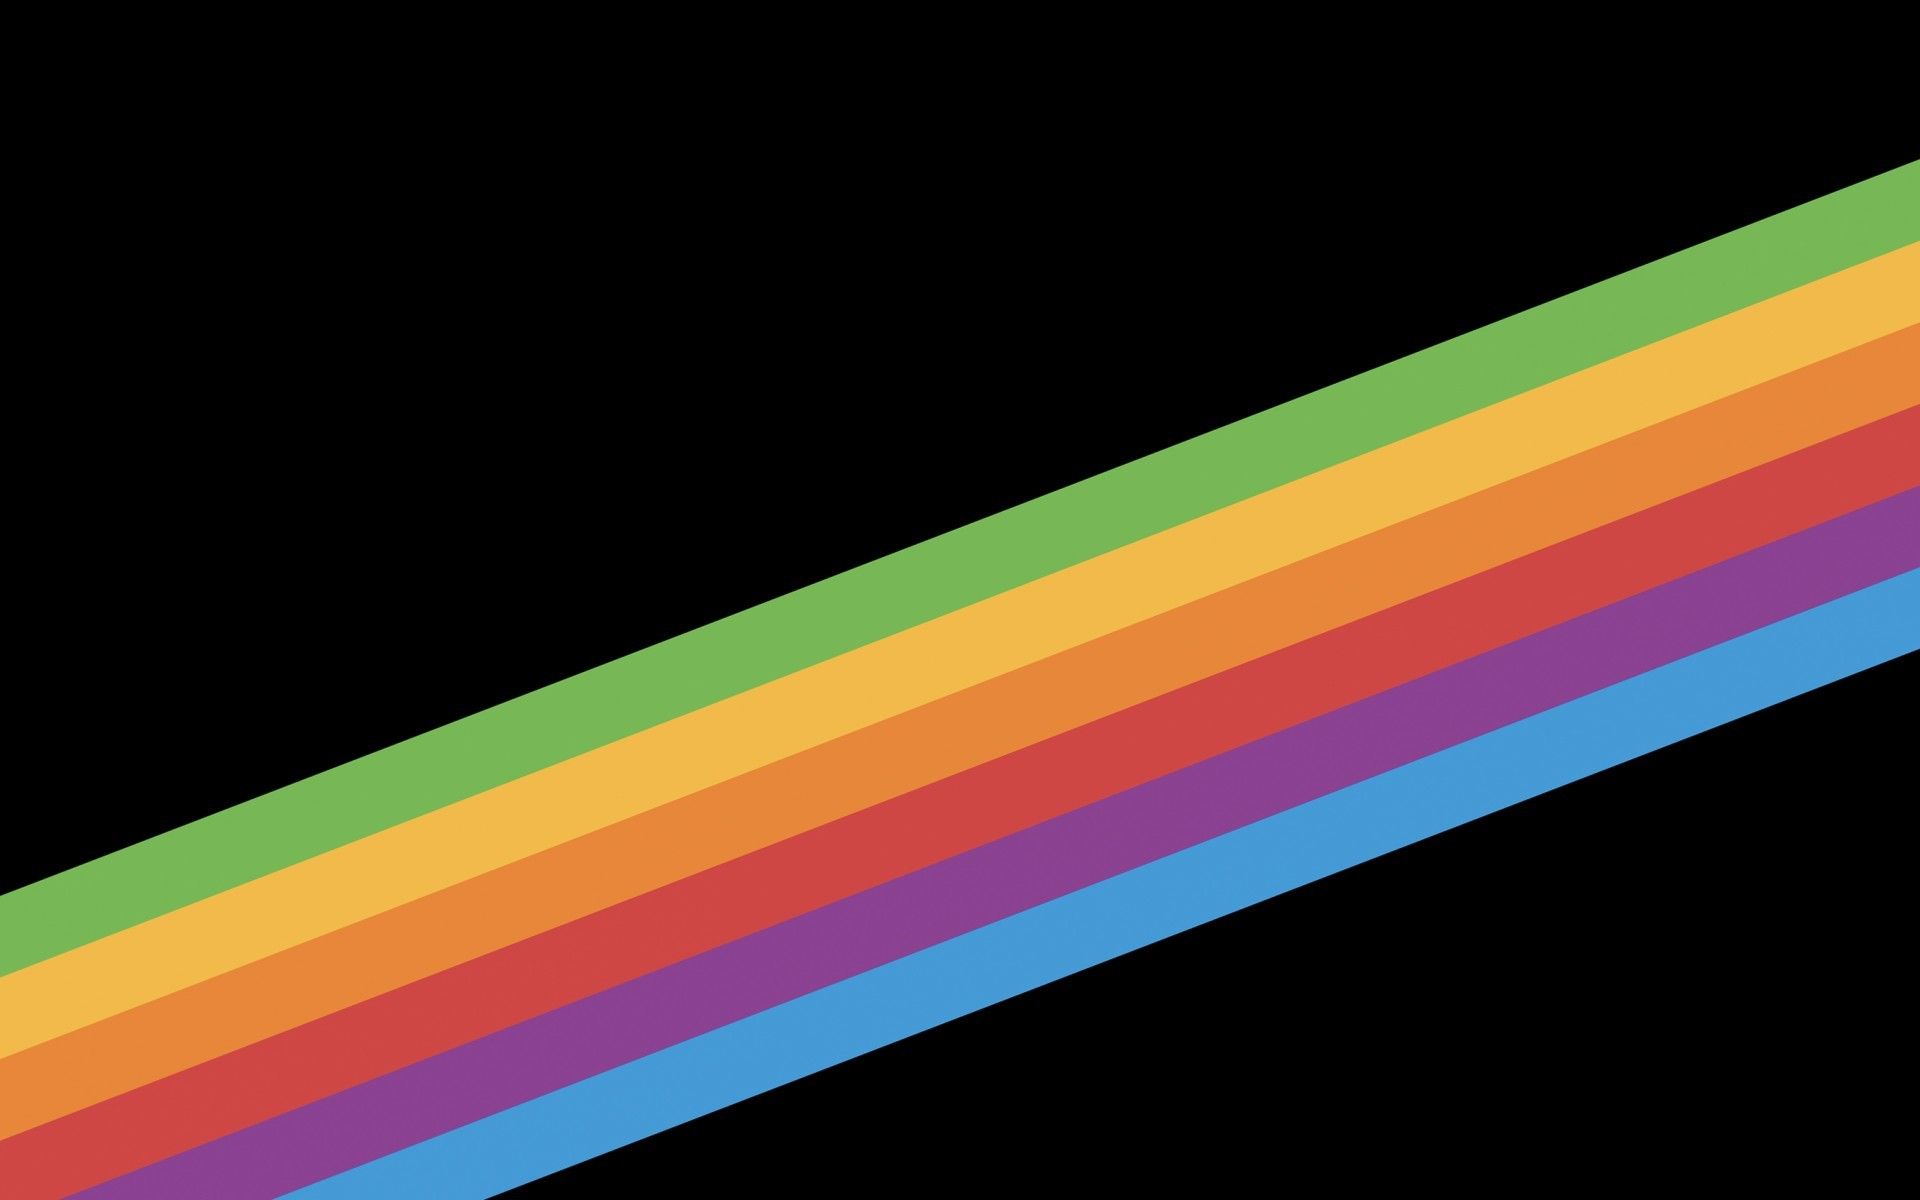 A rainbow colored bar is on top of the black background - Rainbows